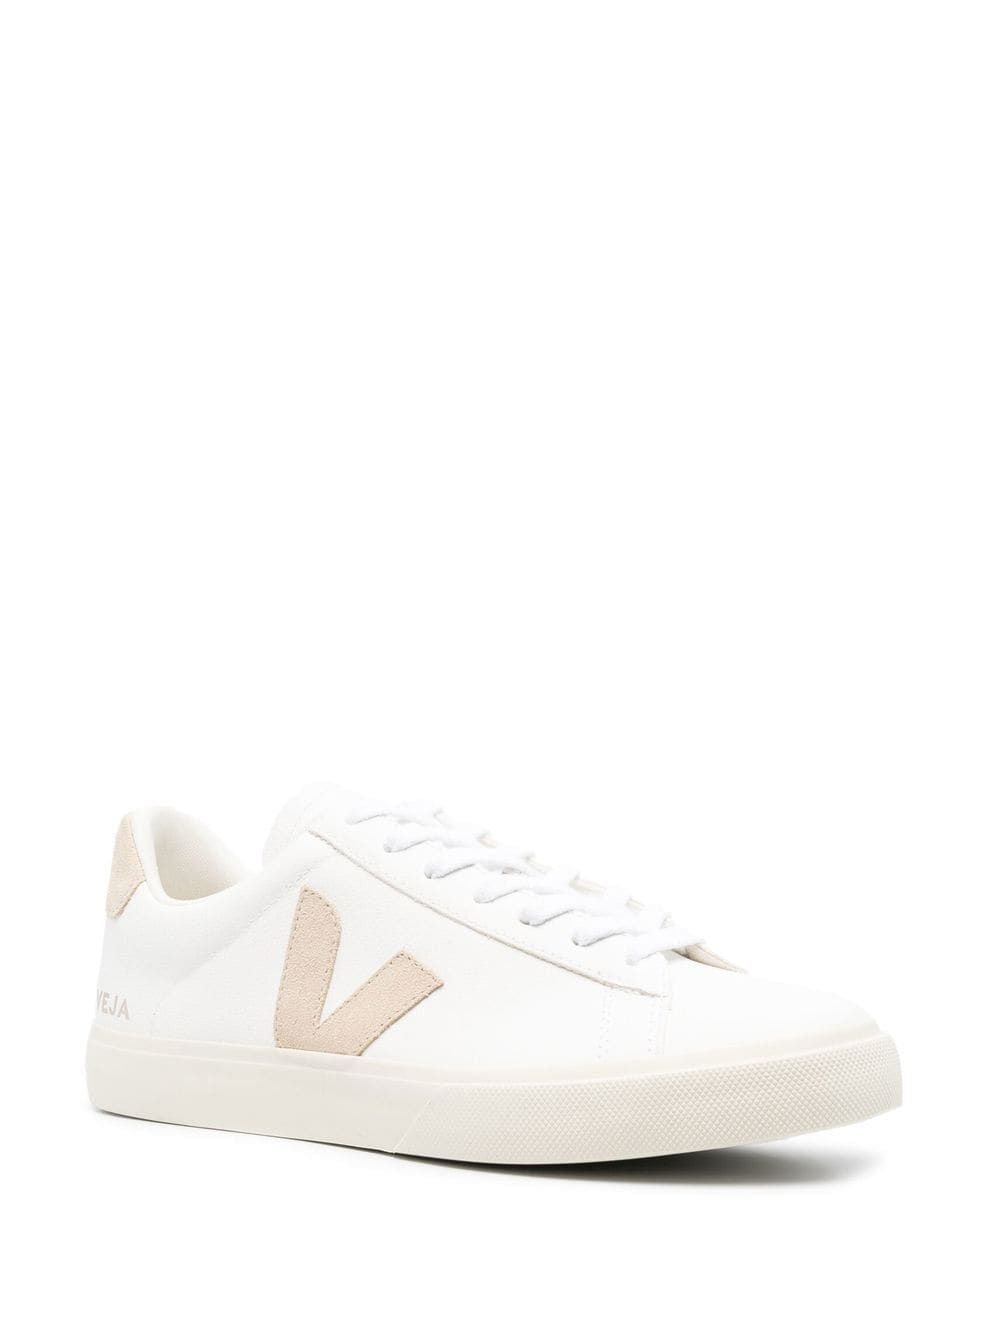 White VEJA VEJA CAMPO LOW-TOP LACE-UP SNEAKERS